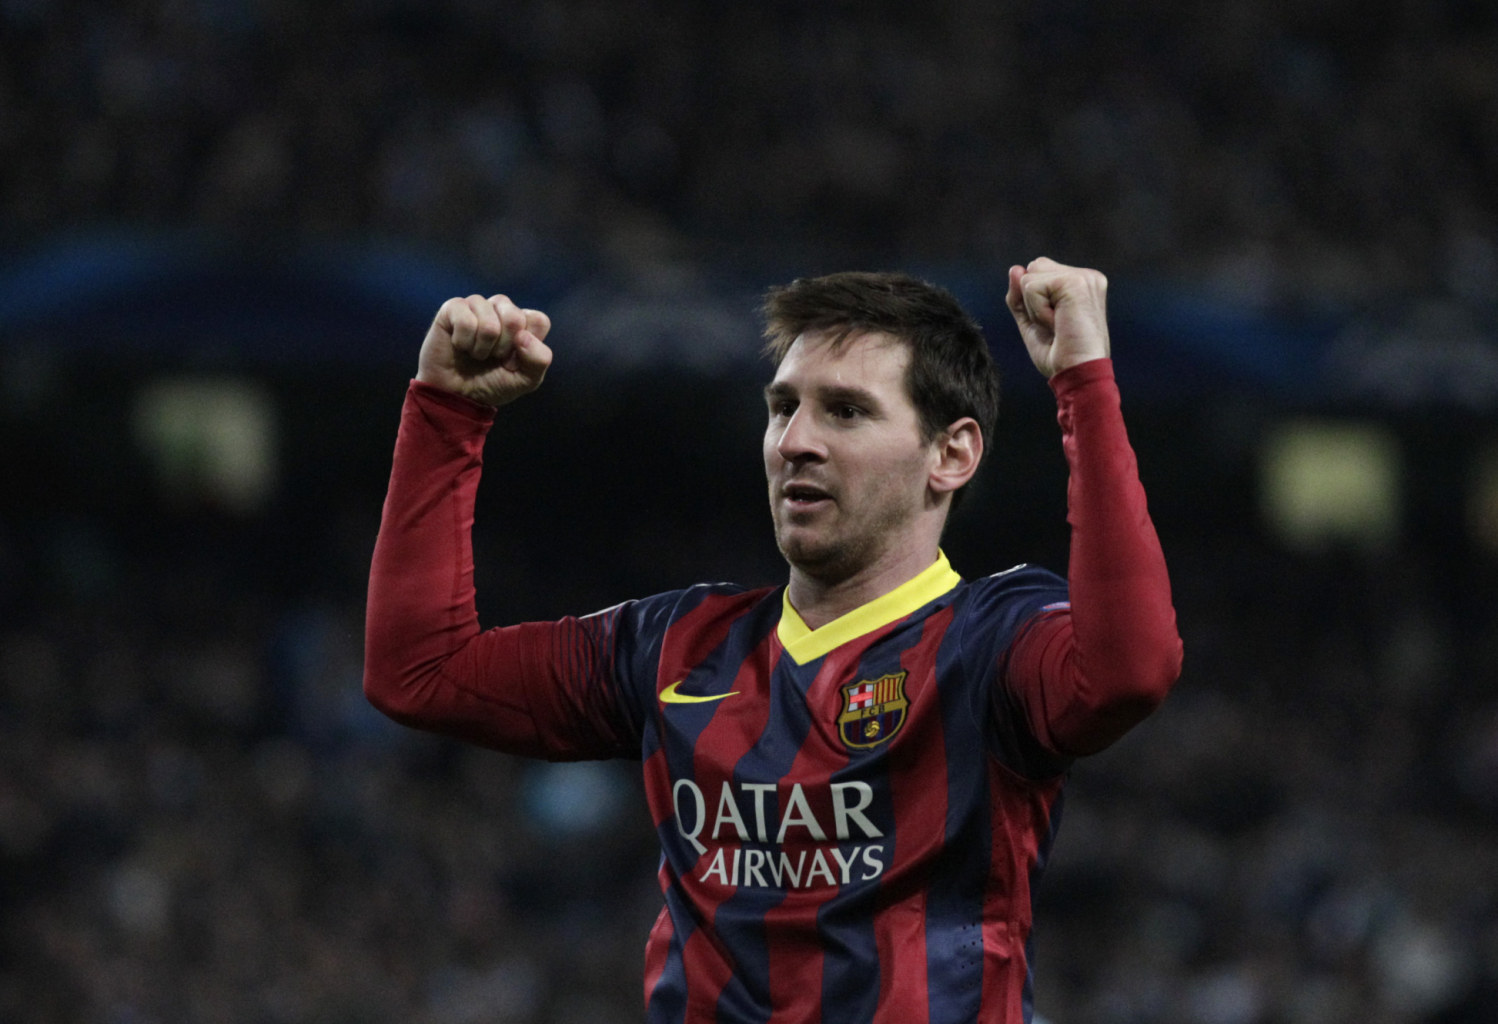 Lionel Messi raises his two hands up